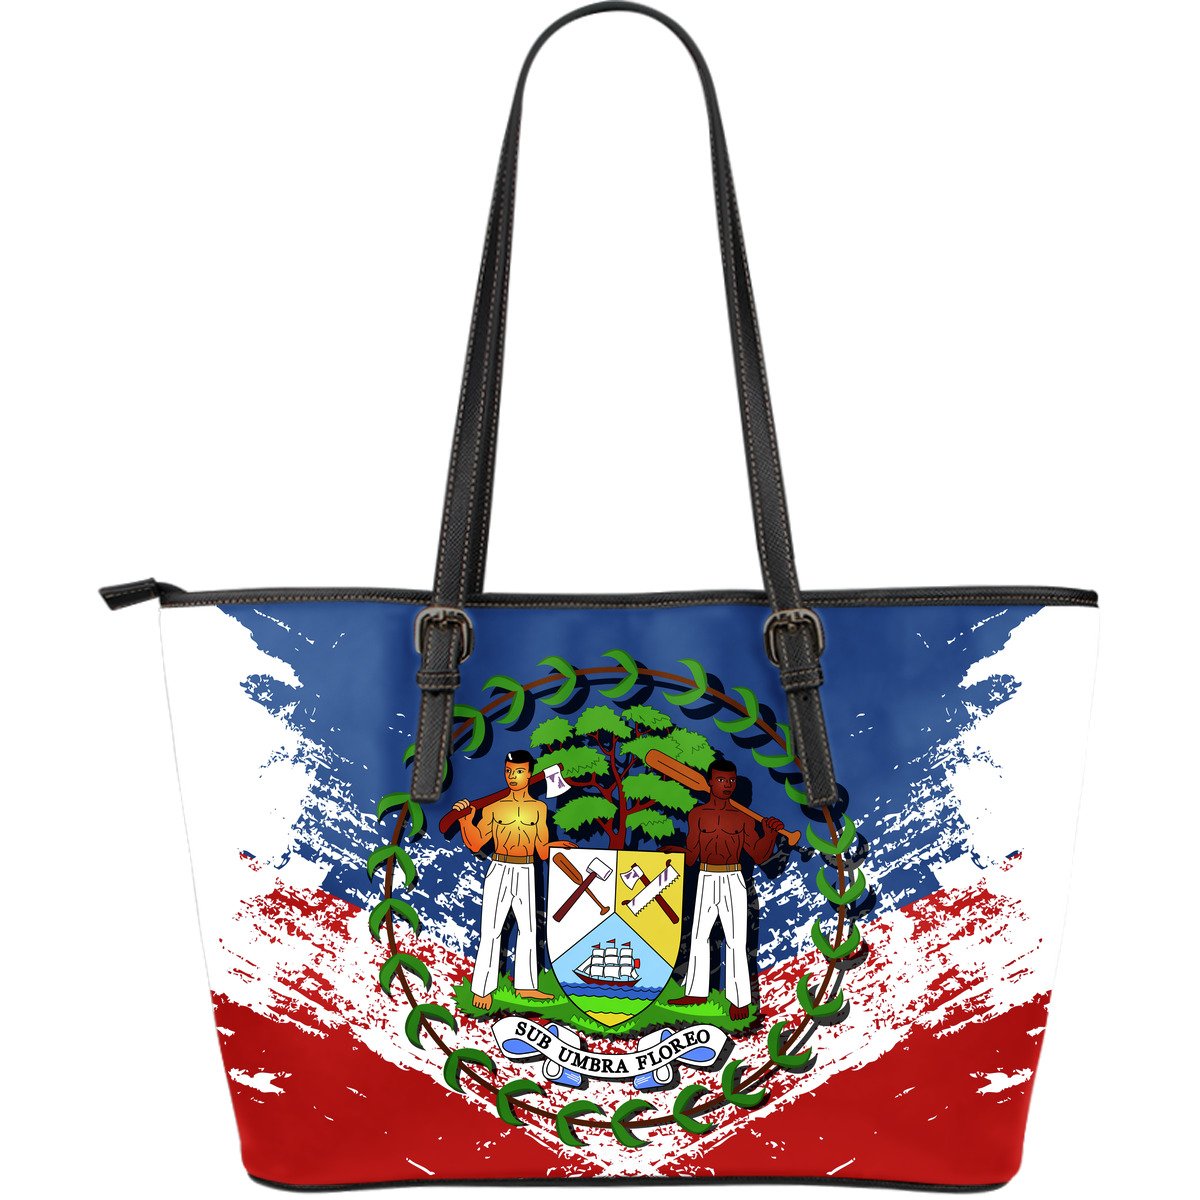 belize-special-large-leather-tote-bag